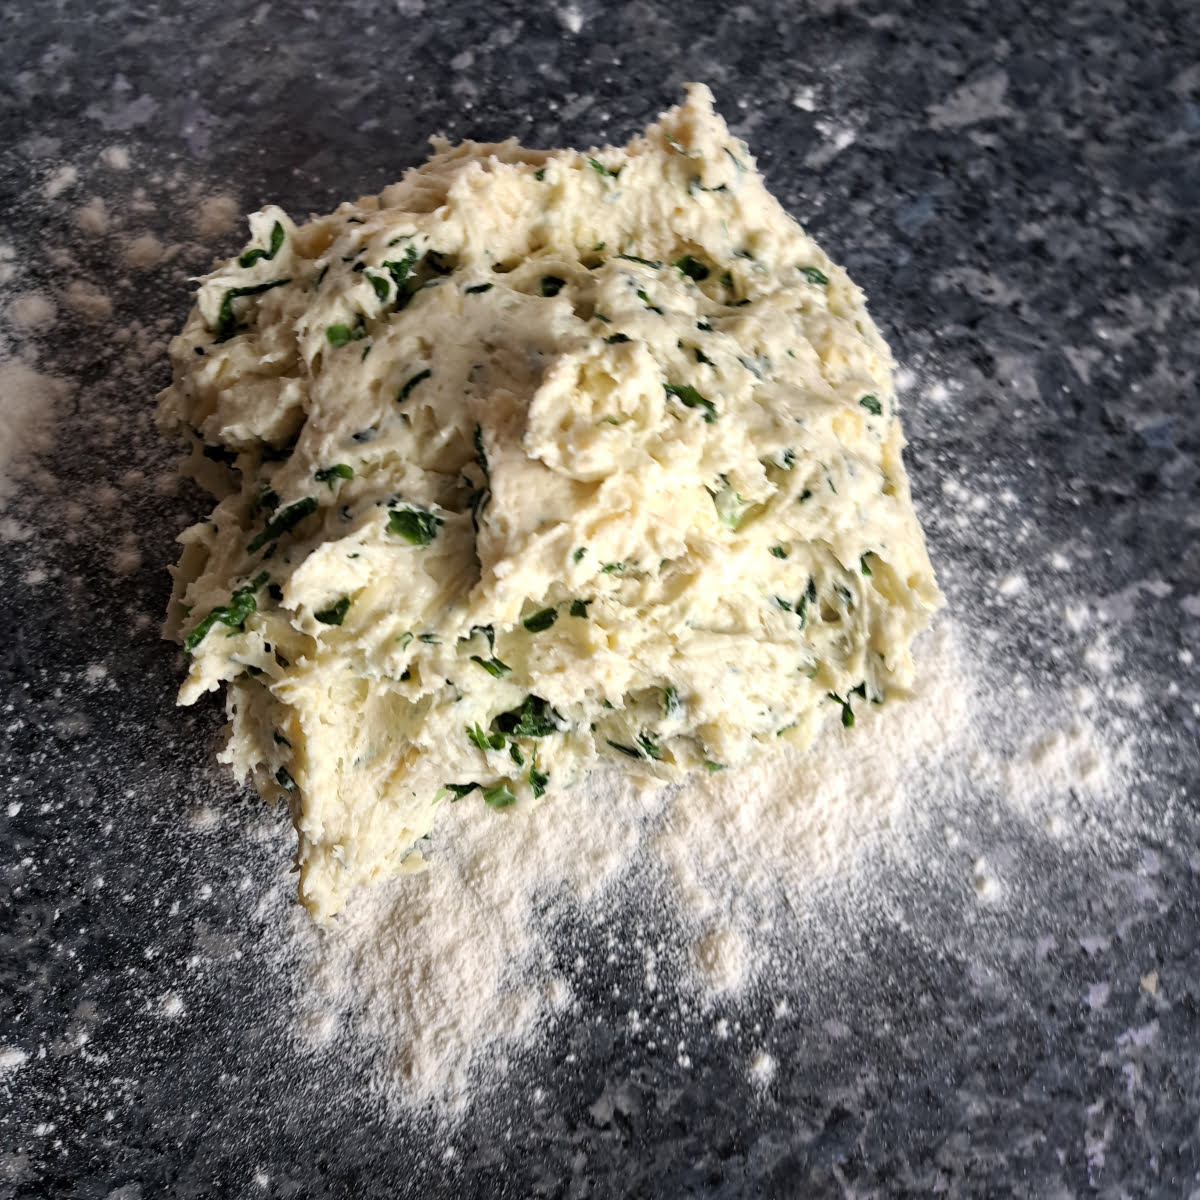 Freshly made wild garlic dough getting kneaded on a kitchen counter.